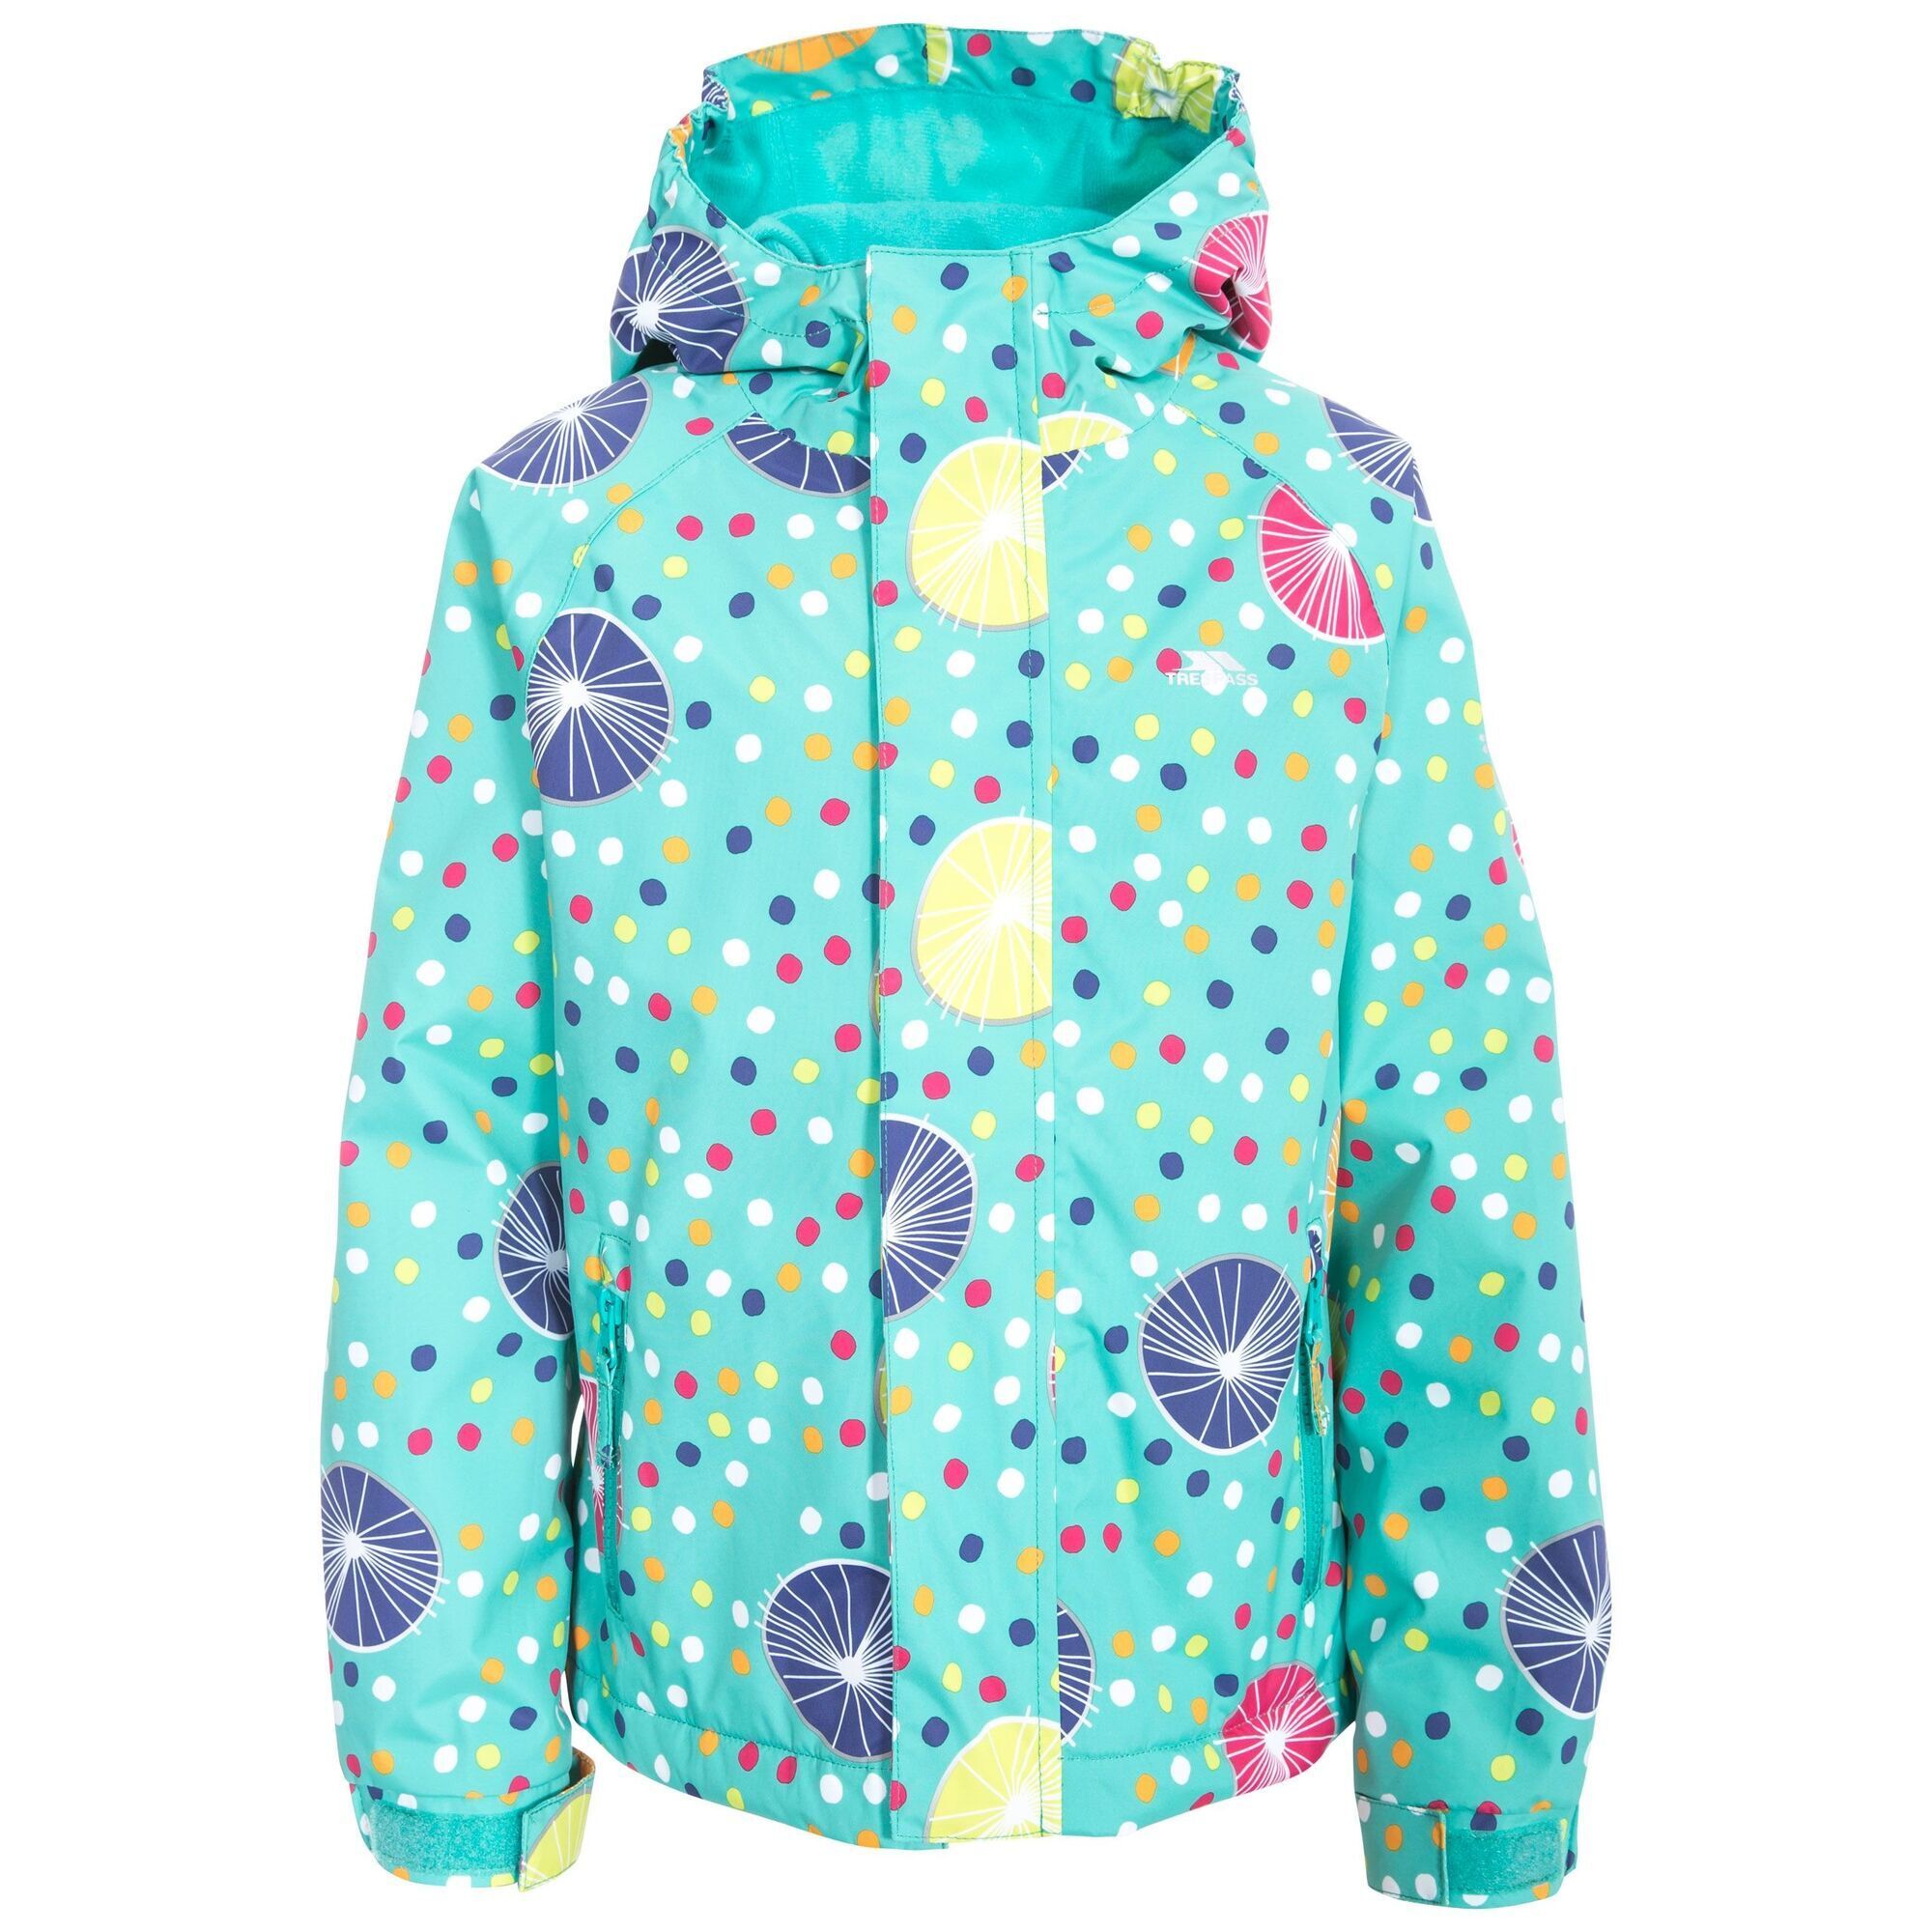 All over printed jacket. Grown on hood. 2 zip pockets. Adjustable cuffs. Waterproof 3000mm, windproof, taped seams. Shell: 100% Polyester, PVC coated, Lining: 100% Polyester. Trespass Childrens Chest Sizing (approx): 2/3 Years - 21in/53cm, 3/4 Years - 22in/56cm, 5/6 Years - 24in/61cm, 7/8 Years - 26in/66cm, 9/10 Years - 28in/71cm, 11/12 Years - 31in/79cm.